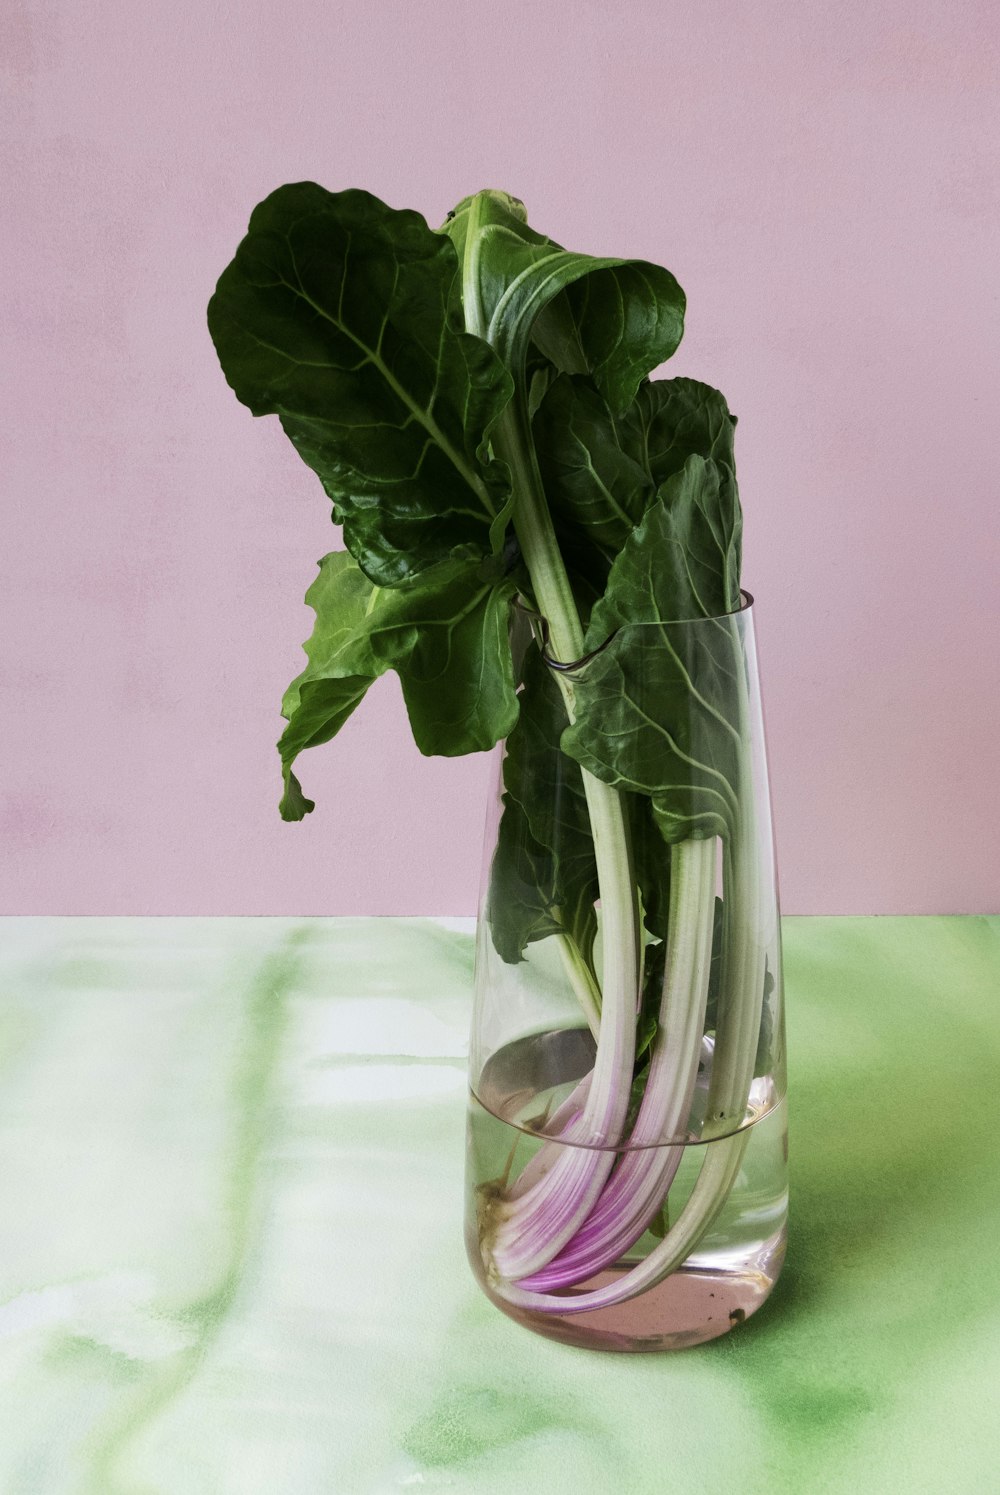 bunch of green leafy vegetable in a clear glass vase